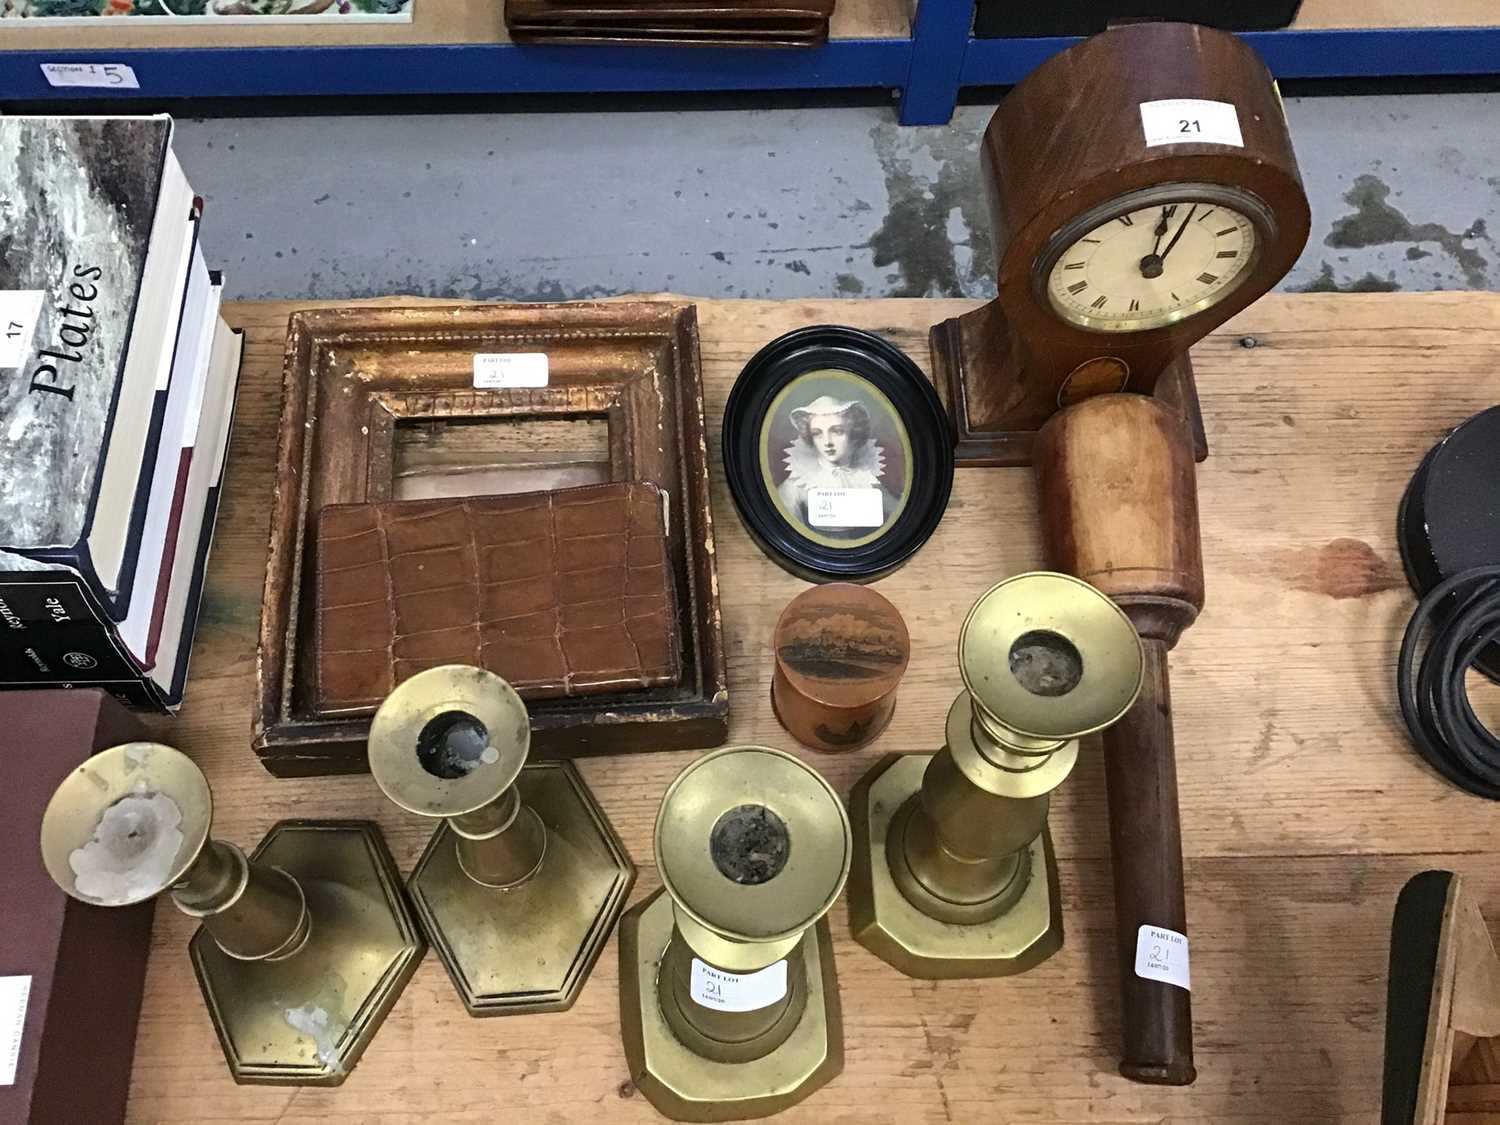 Lot 21 - Edwardian balloon form clock, 19th century brass candlesticks, leather wallets, mauclineware box, portraits miniature, 19th century framed engraving